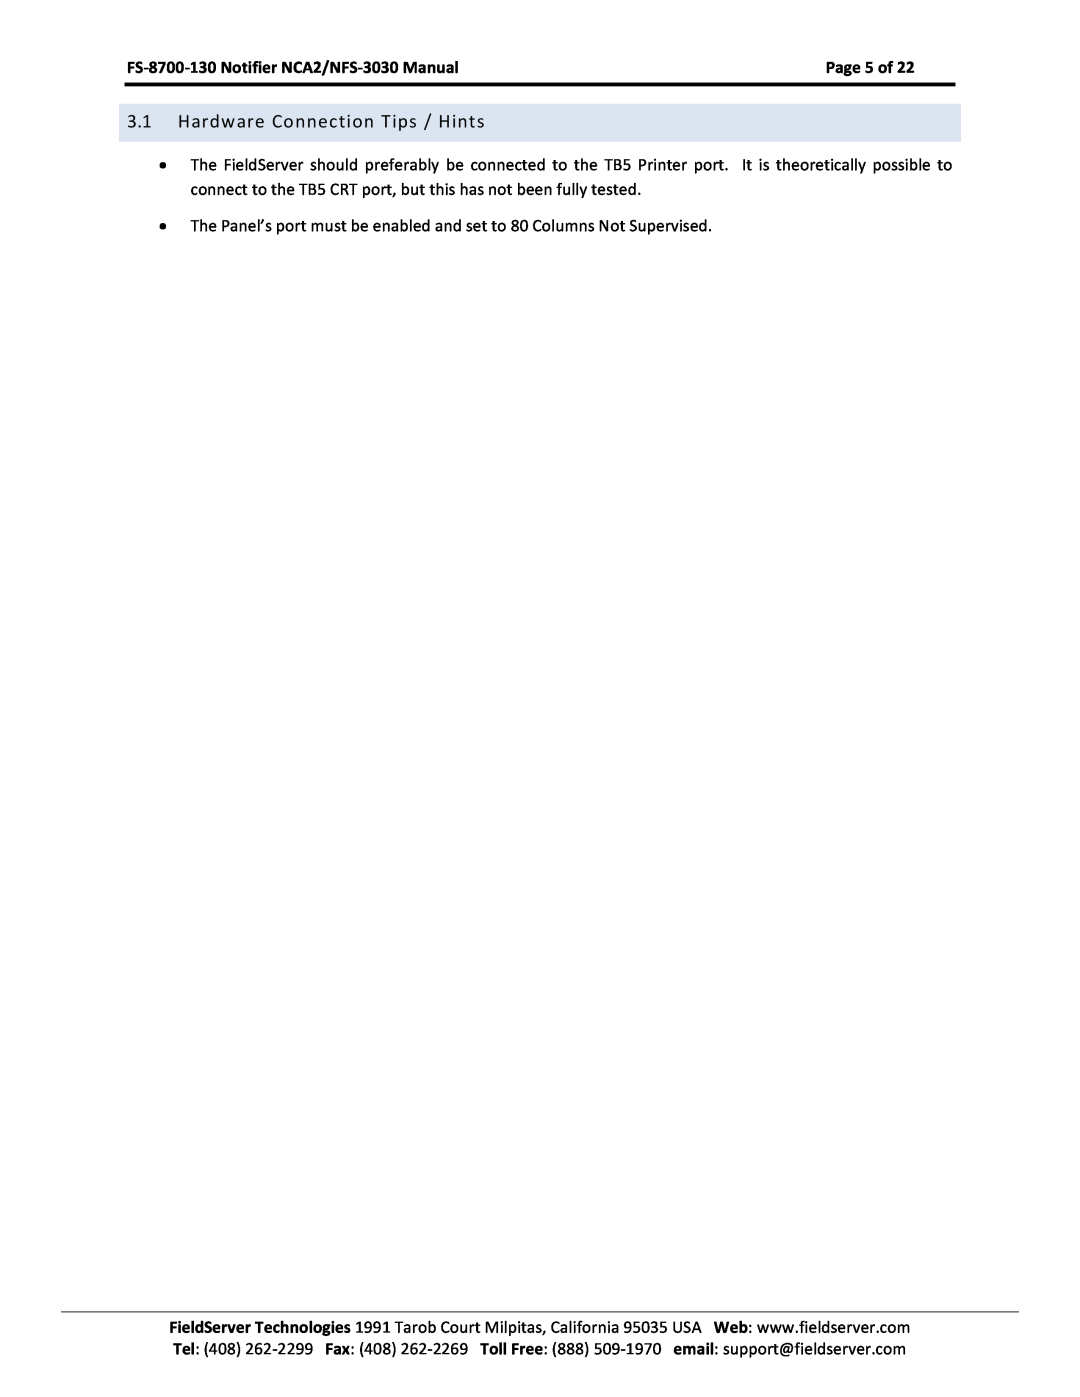 FieldServer NCA2-NFS2-3030 Hardware Connection Tips / Hints, Page 5 of, FS-8700-130 Notifier NCA2/NFS-3030 Manual 